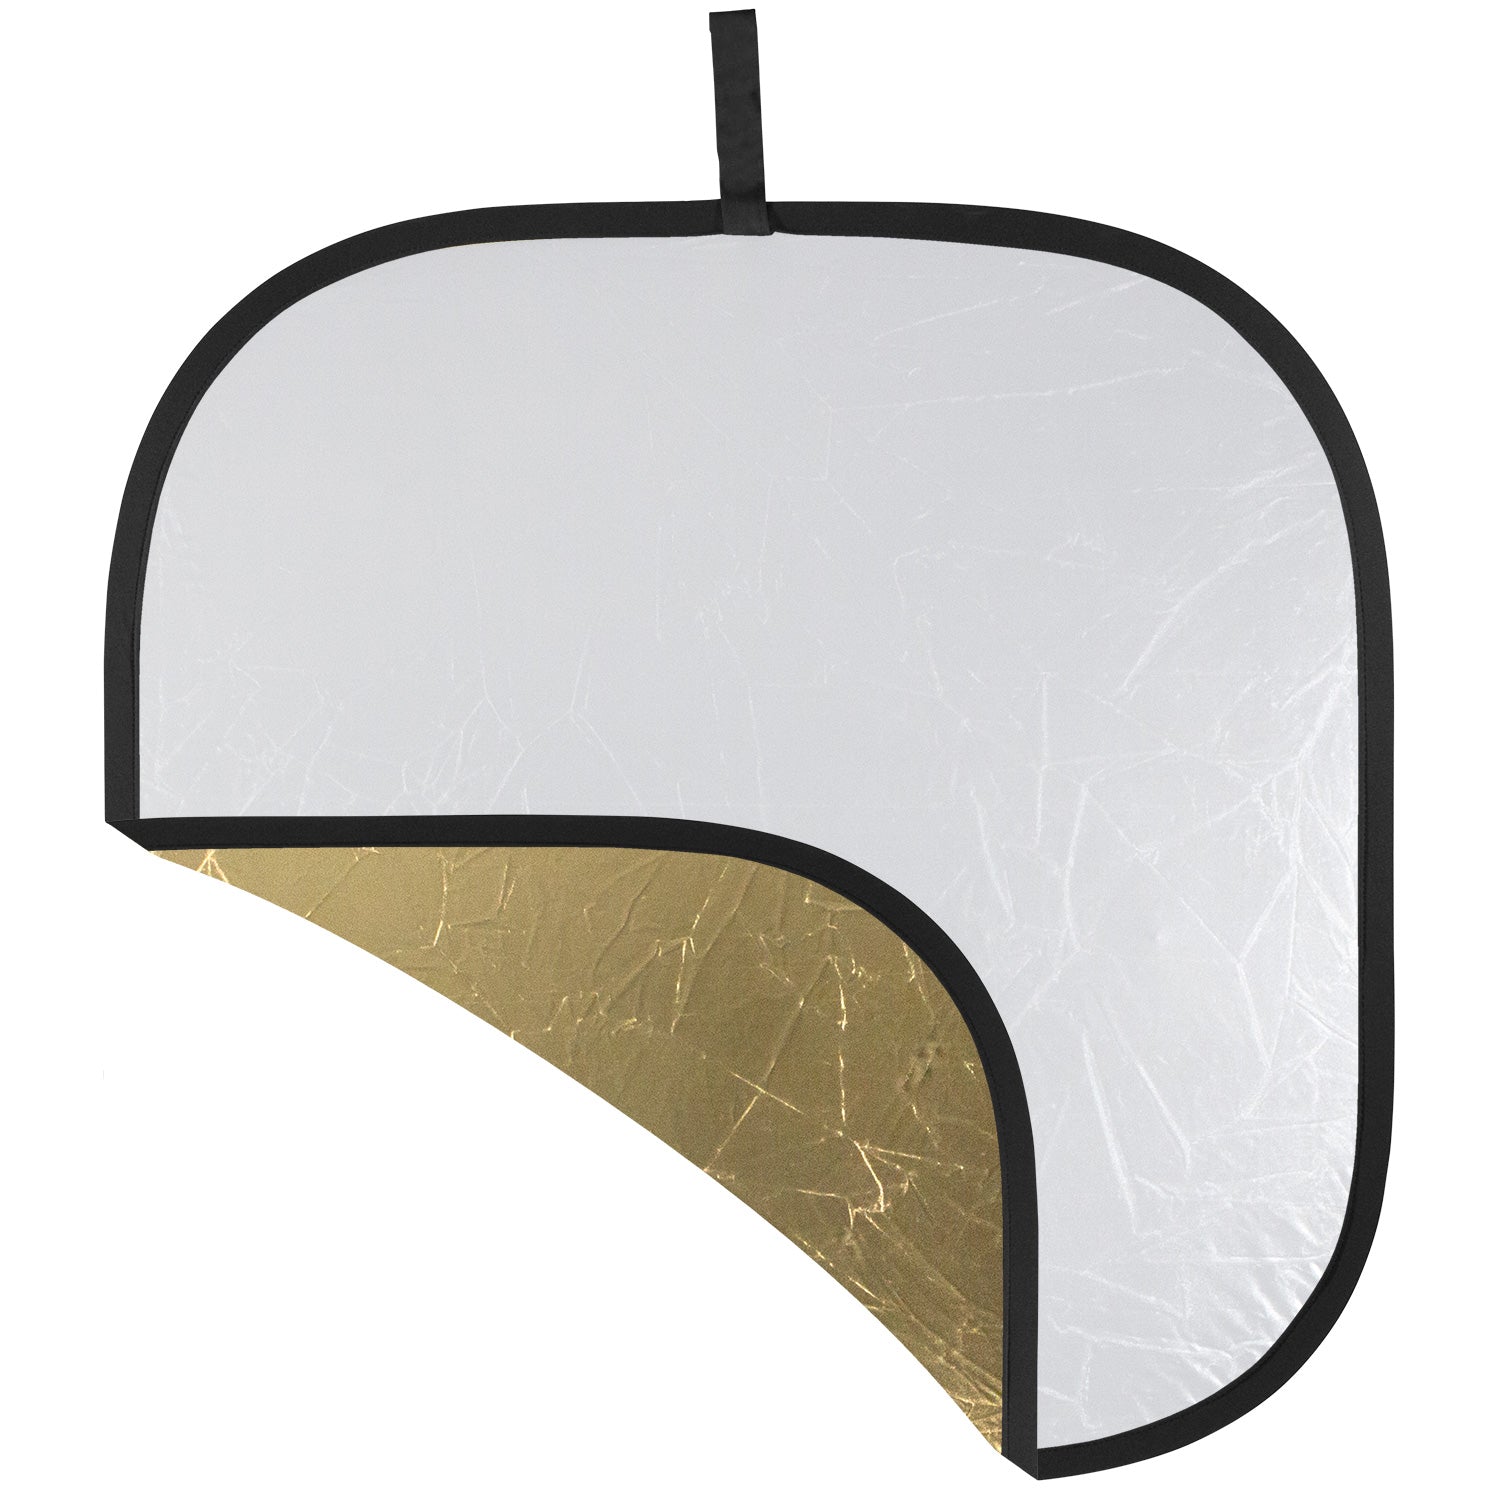 Illuminator Collapsible 2-in-1 Gold/White Bounce Reflector (42")